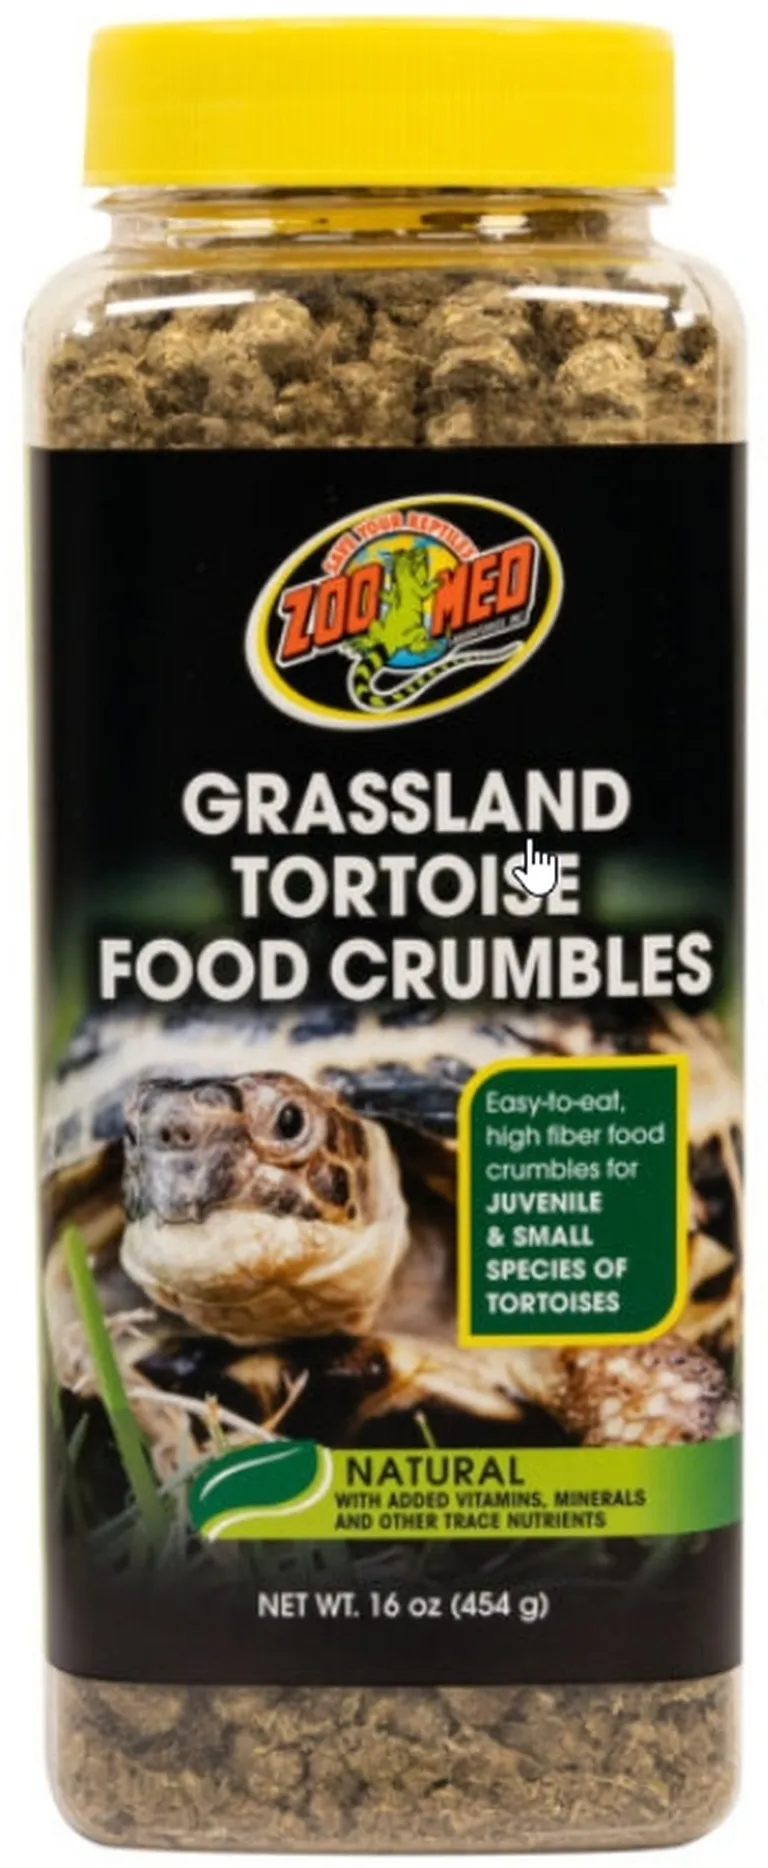 Zoo Med Grassland Tortoise Food Crumbles Photo 2